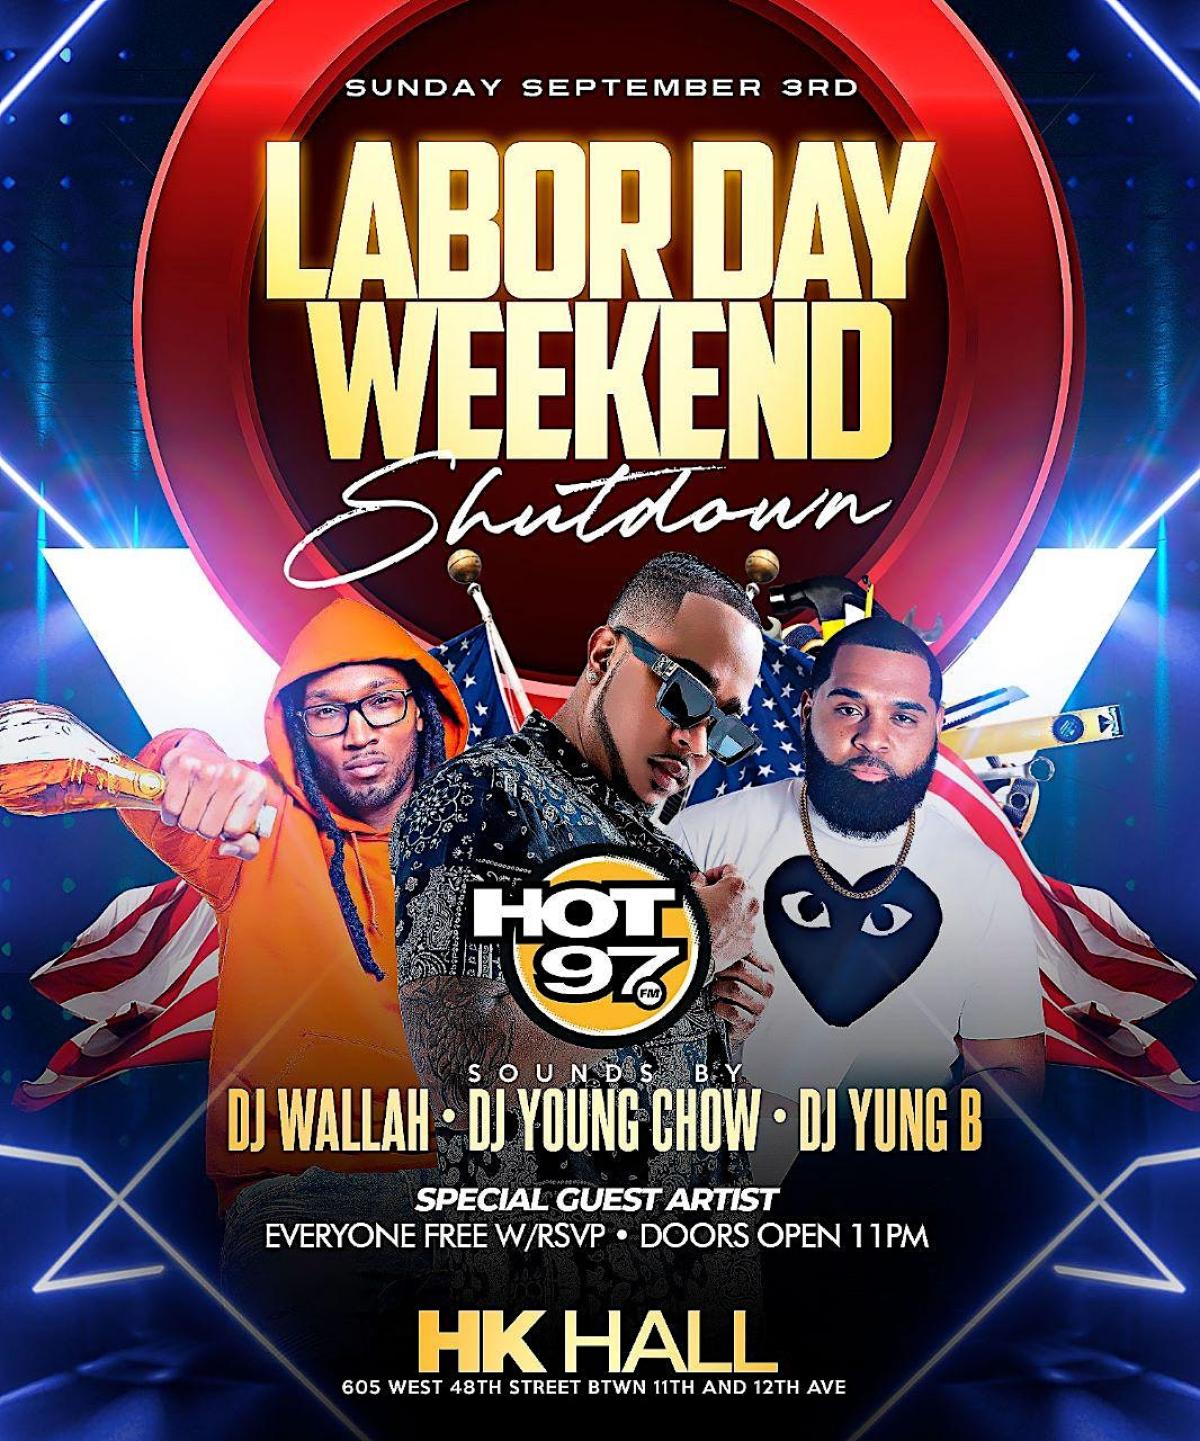 Hot 97 Labor Day Weekend Shutdown flyer or graphic.